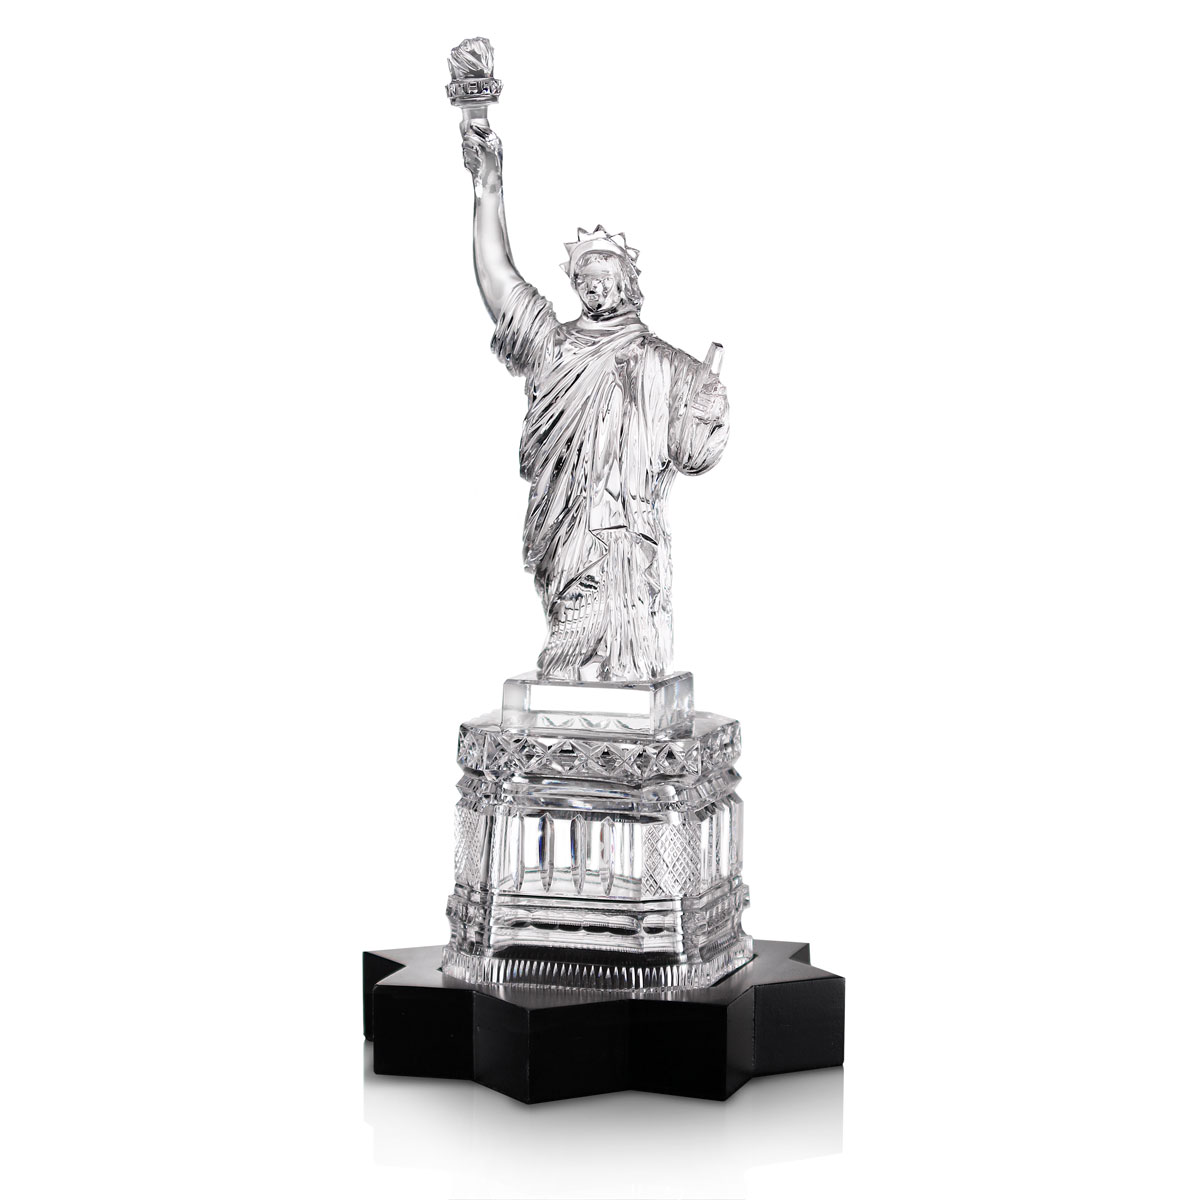 Cashs Ireland Art Collection, Lady Liberty Sculpture, Limited Edition